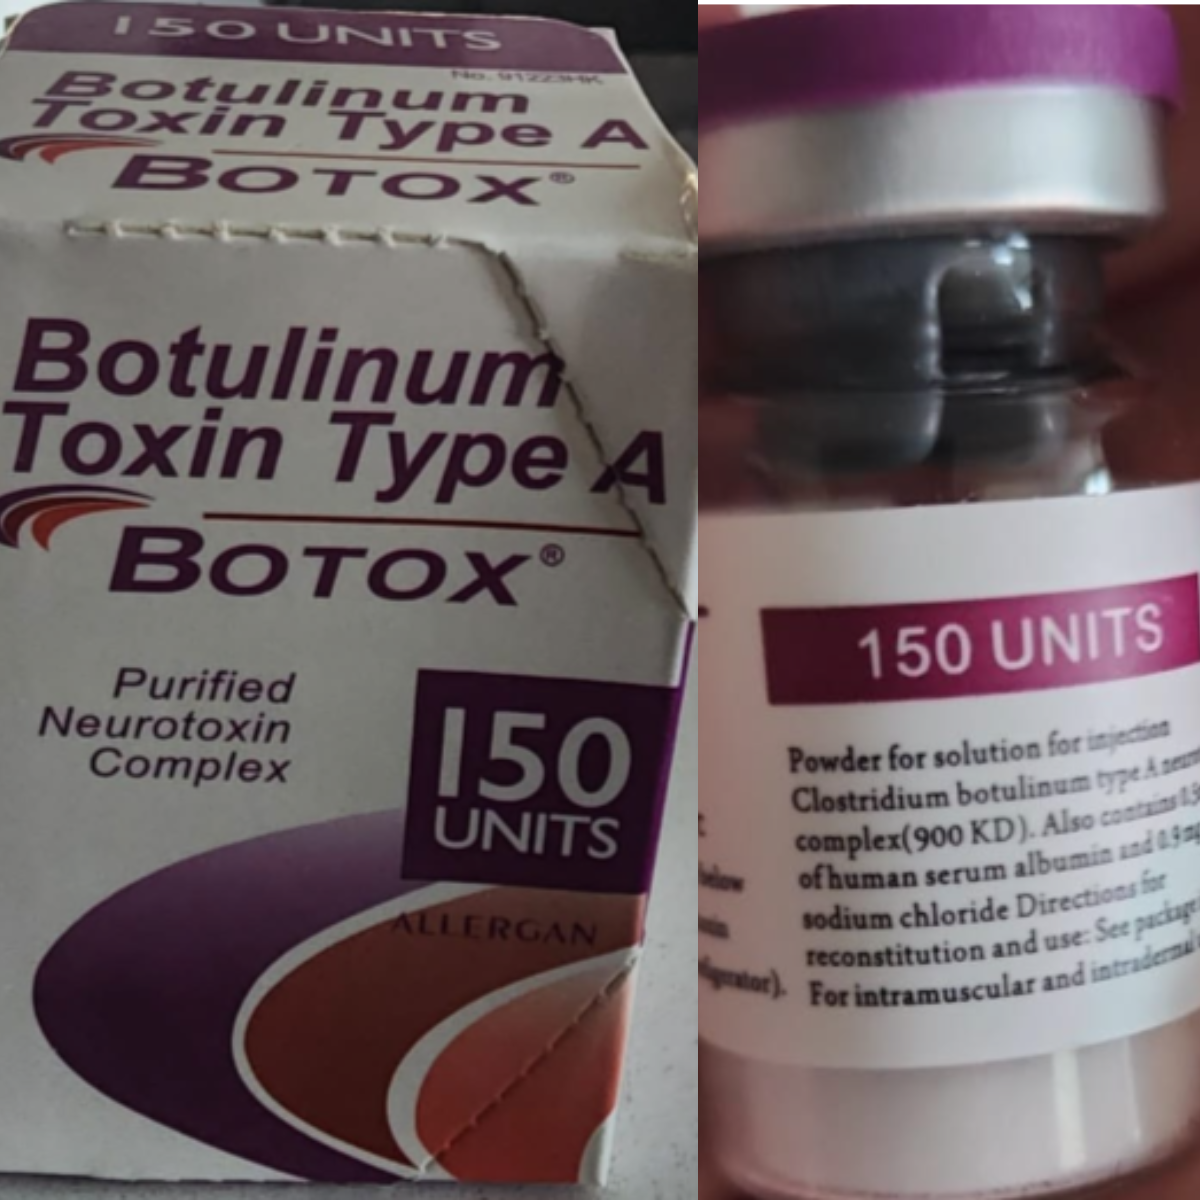 Counterfeit Botox packaging and vial | Image Credit: FDA